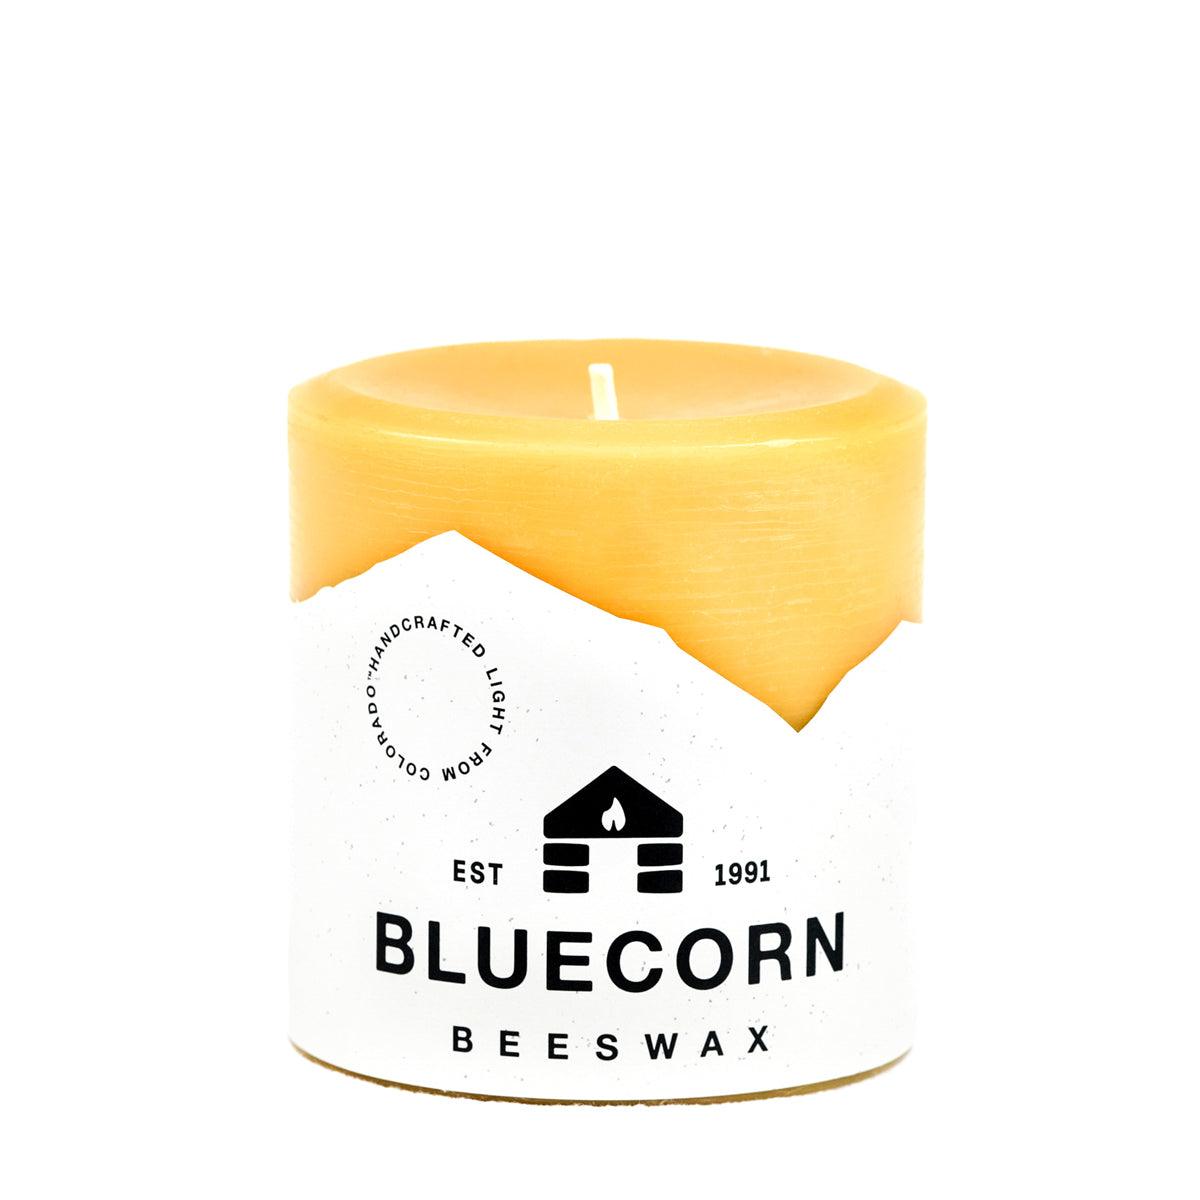 Bluecorn Beeswax 100% Pure Beeswax 4" x 4" Raw Pillar Candle. Burn Time: 120 hours. Made with 100% Pure Beeswax, wax is golden in color with a light honey scent. Made with 100% pure cotton wick, no lead and paraffin free. Clean burning and non-toxic. Features Bluecorn Beeswax label printed on 100% recycled paper. Clearance items might have an odd blemish or air bubble, but will still burn beautifully.